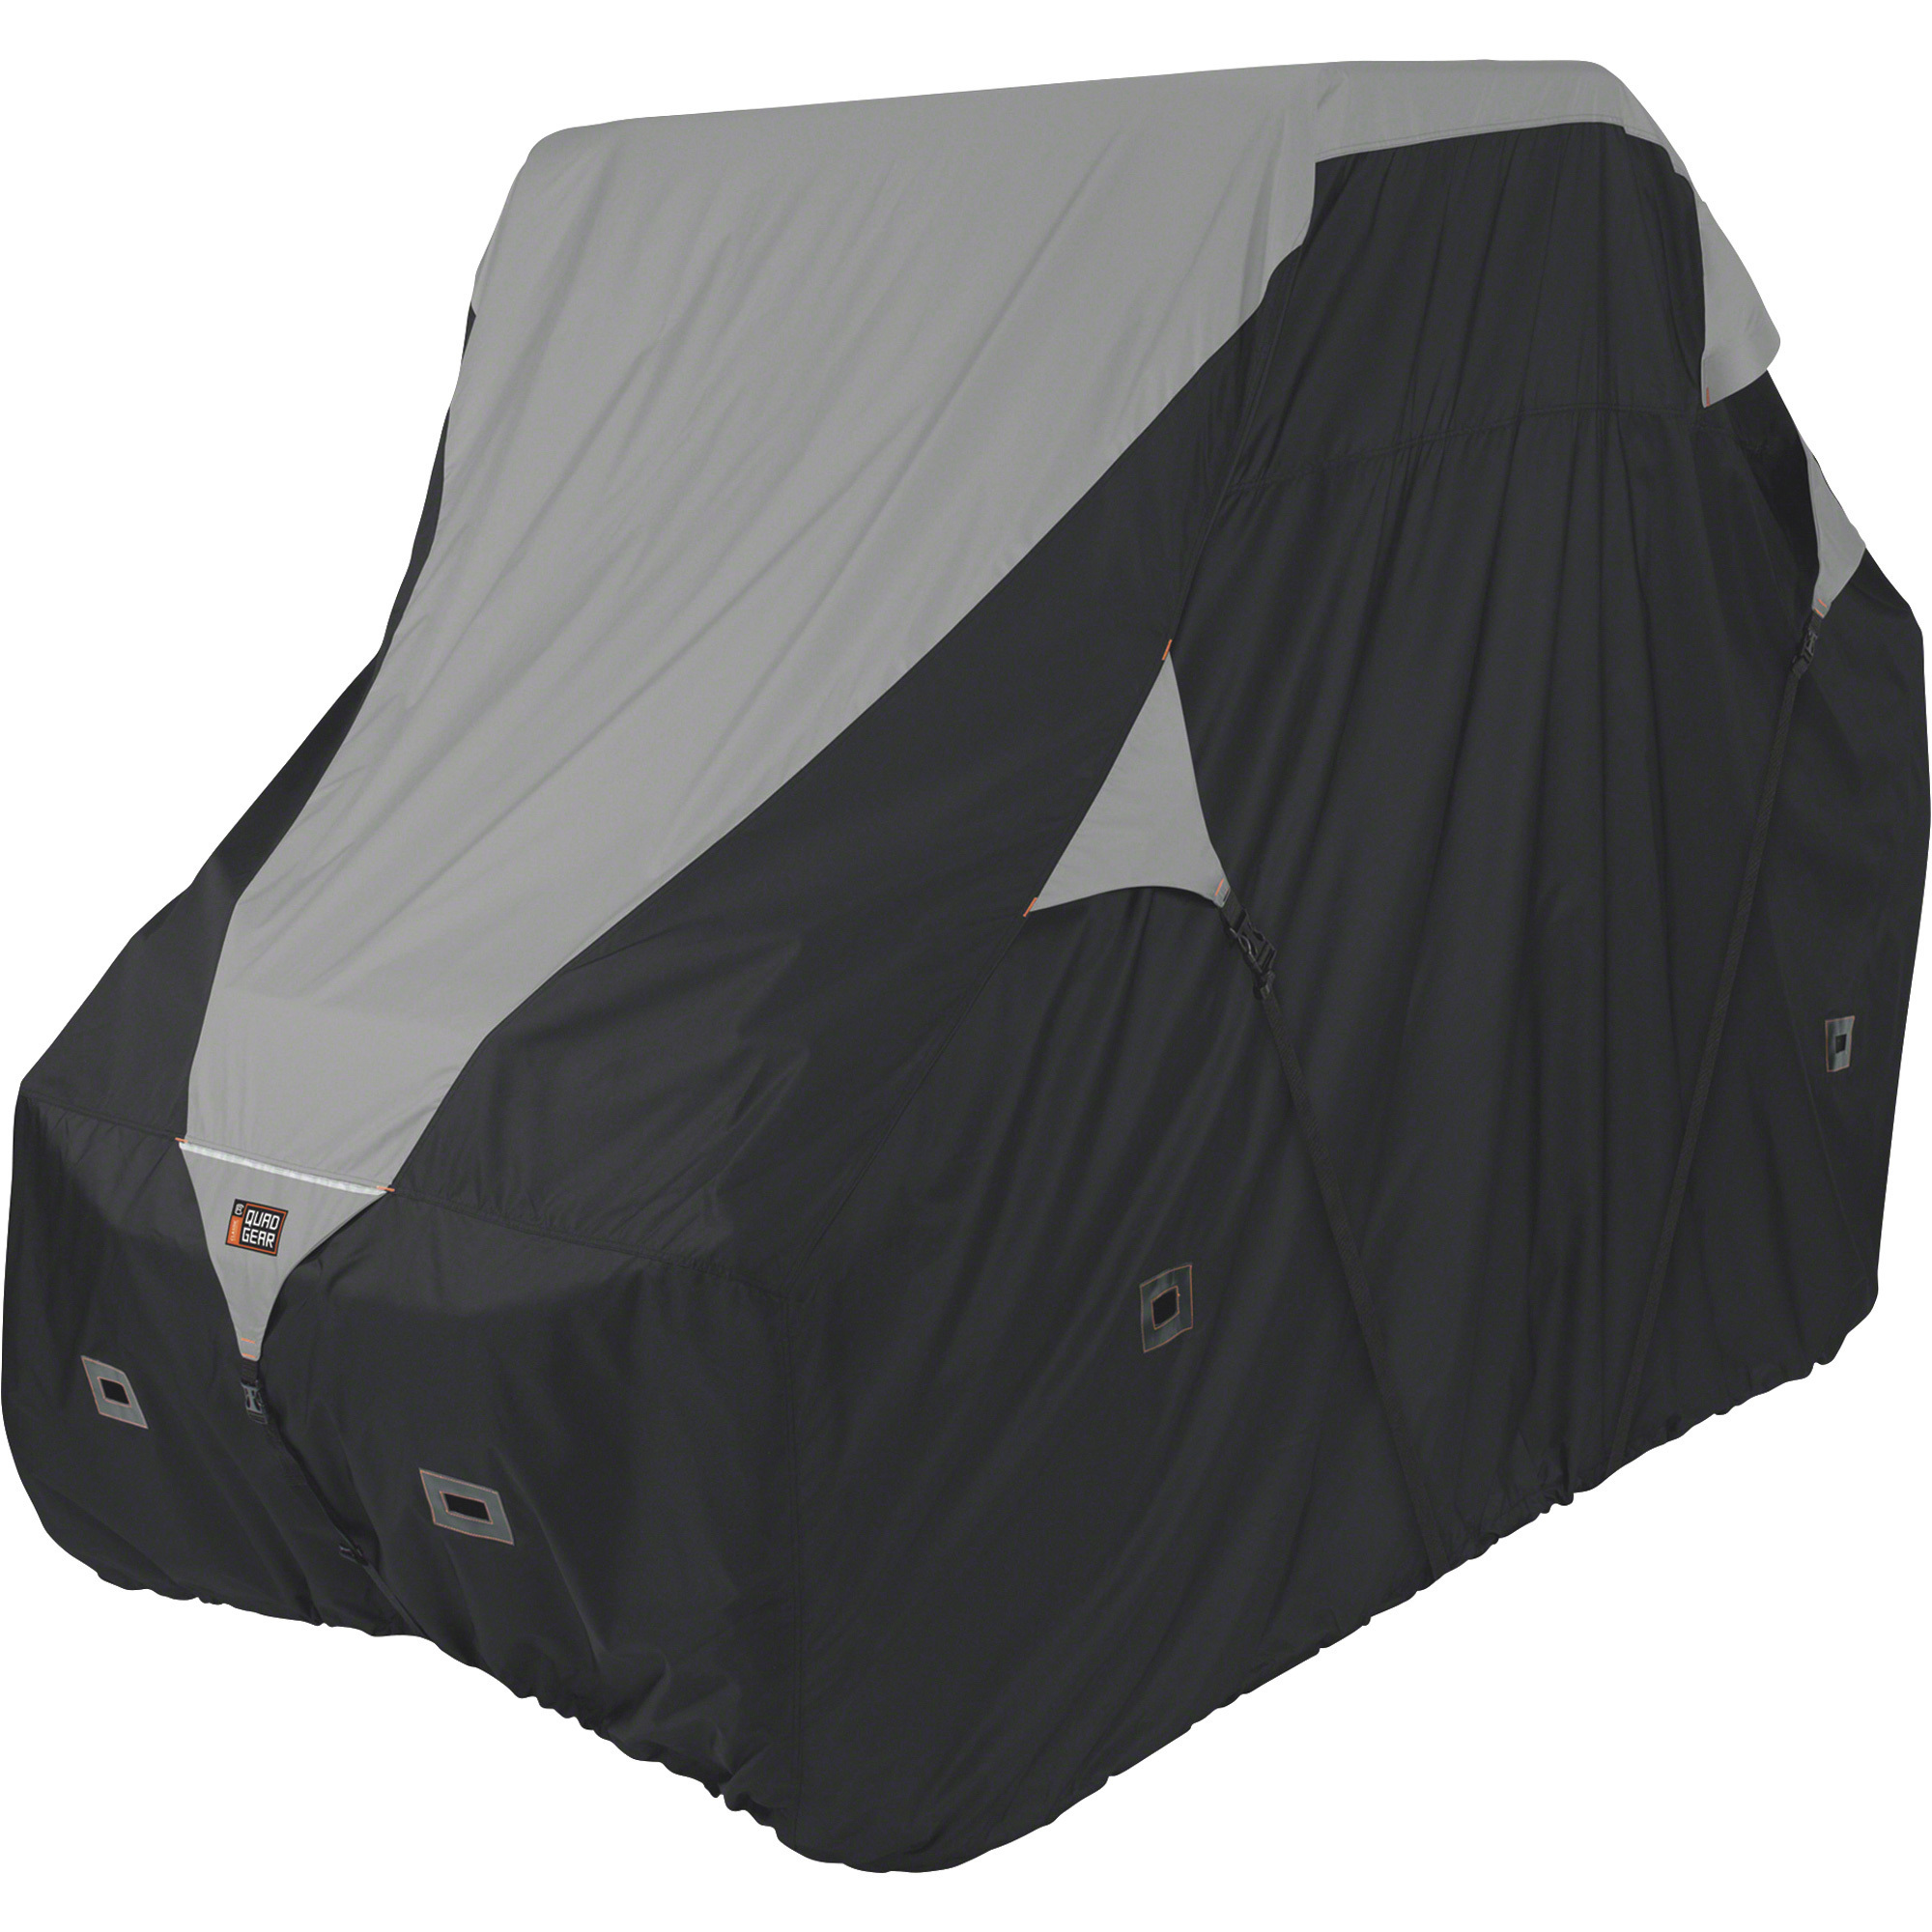 Classic Accessories QuadGear UTV Deluxe Storage Cover, Black/Gray, XL, Fits Mid-Size 2-Passenger UTVs up to 113Inch L x 60Inch W x 70Inch H, Model 18-